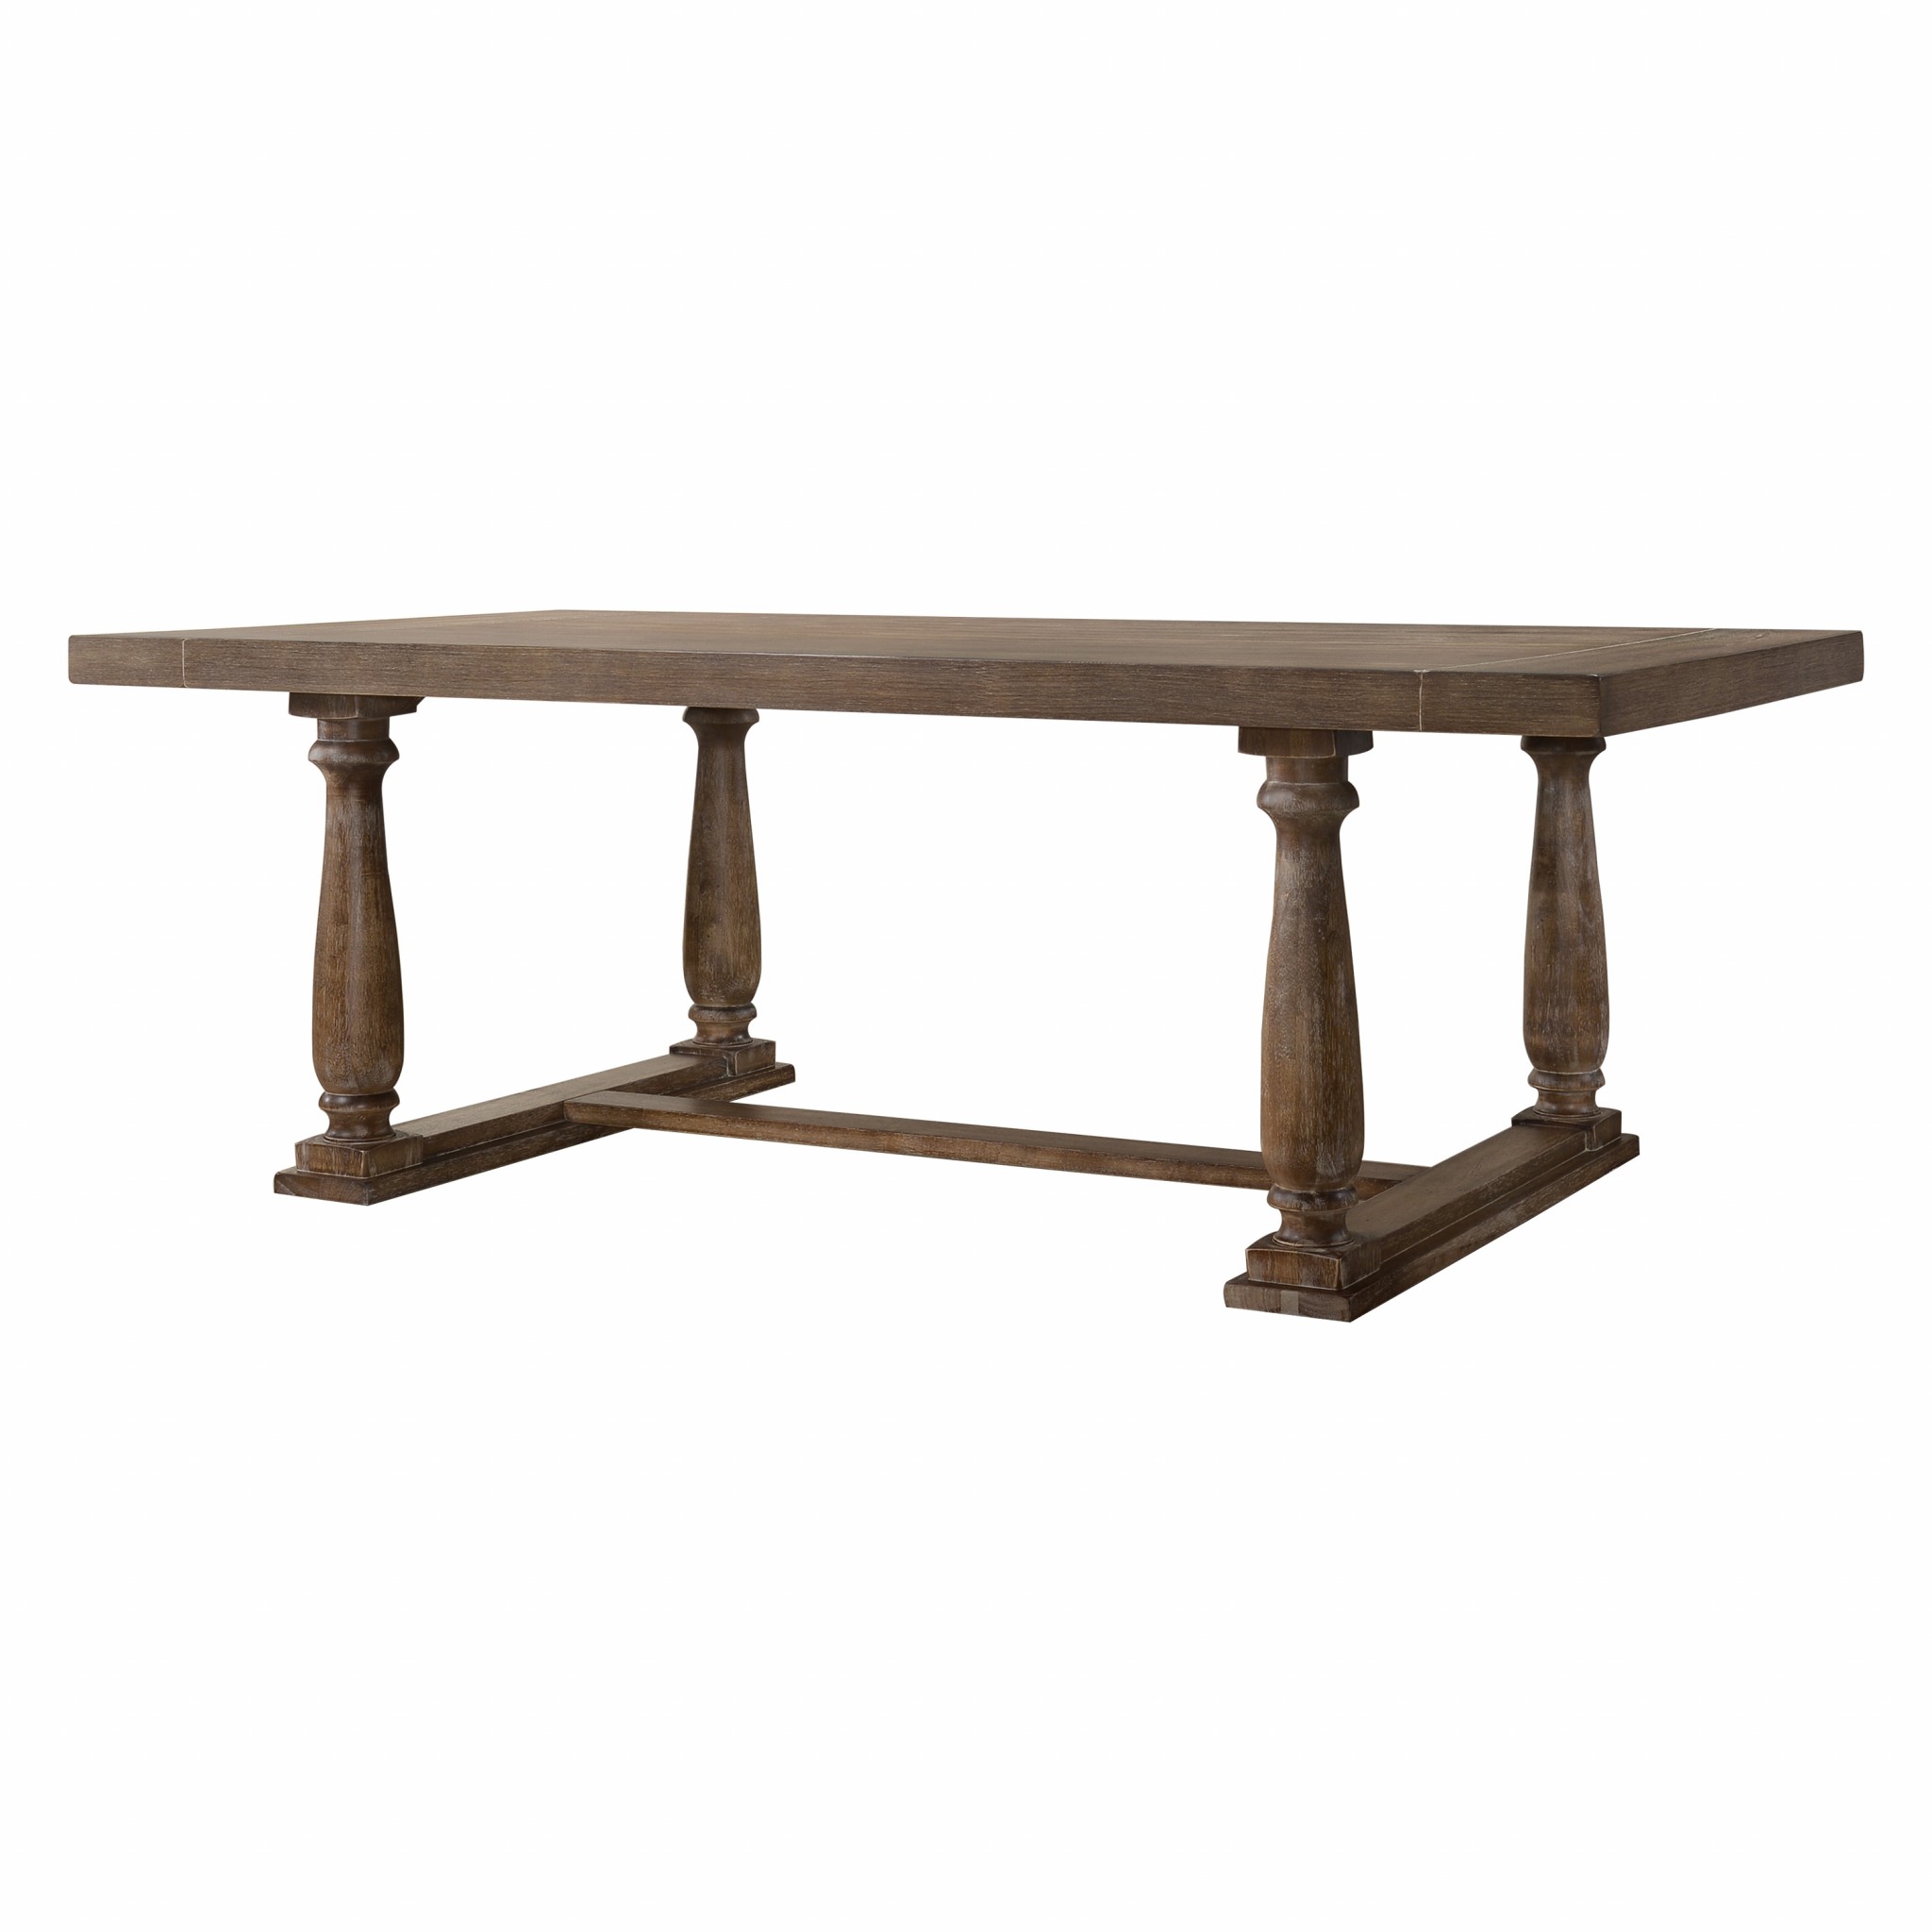 84" X 42" X 30" Weathered Oak Dining Table